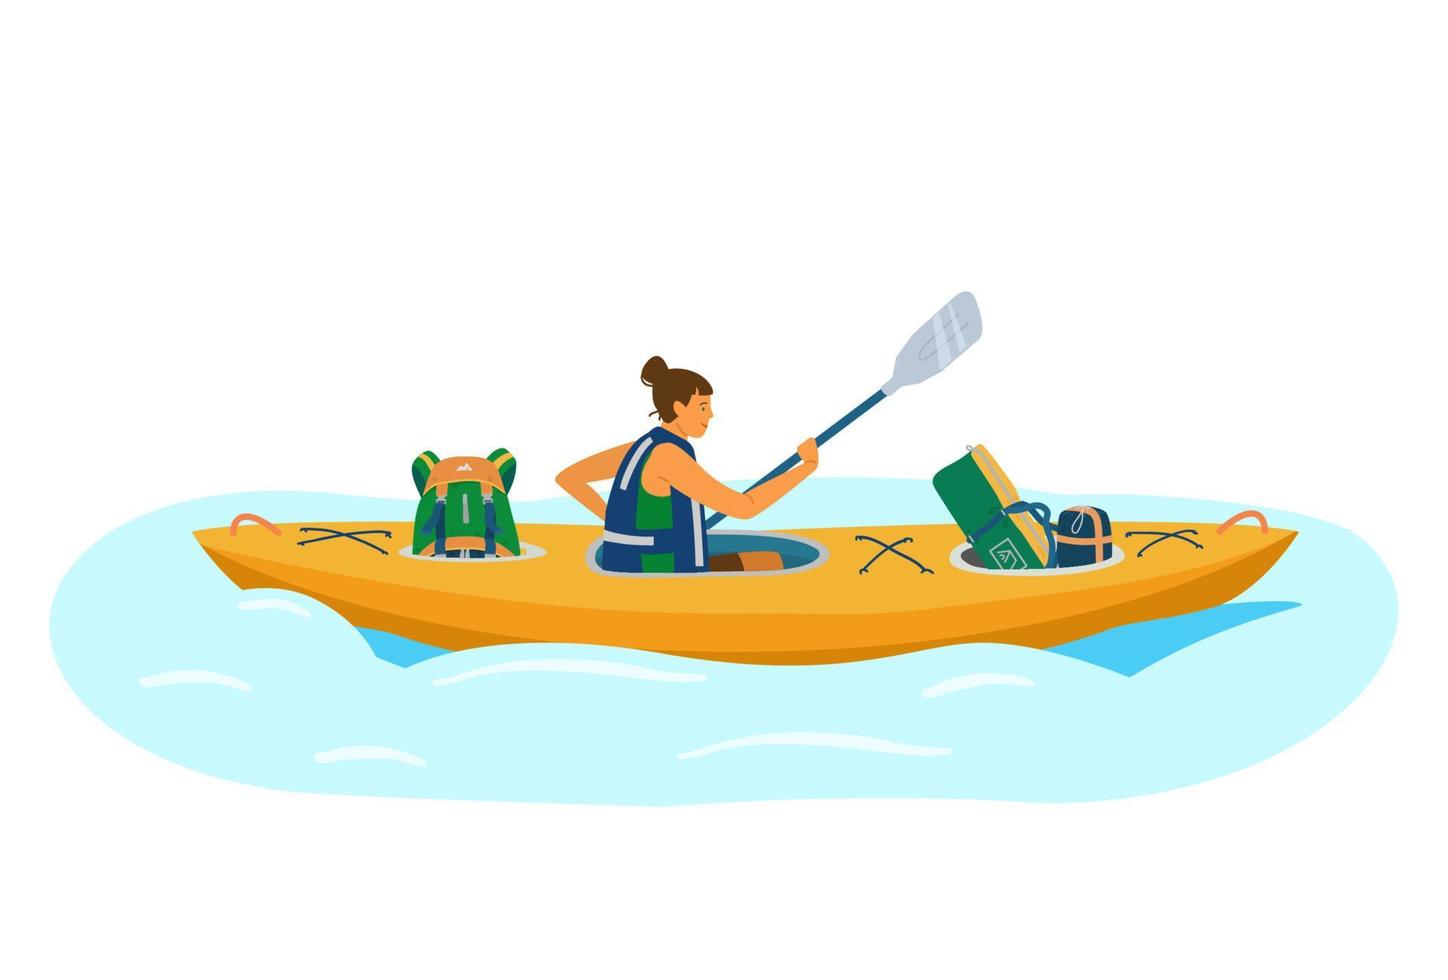 Woman in life jacket rows in kayak with tourist equipment.  Backpack, sleeping bag, tent. Tourist in water trip. Flat cartoon vector illustration.